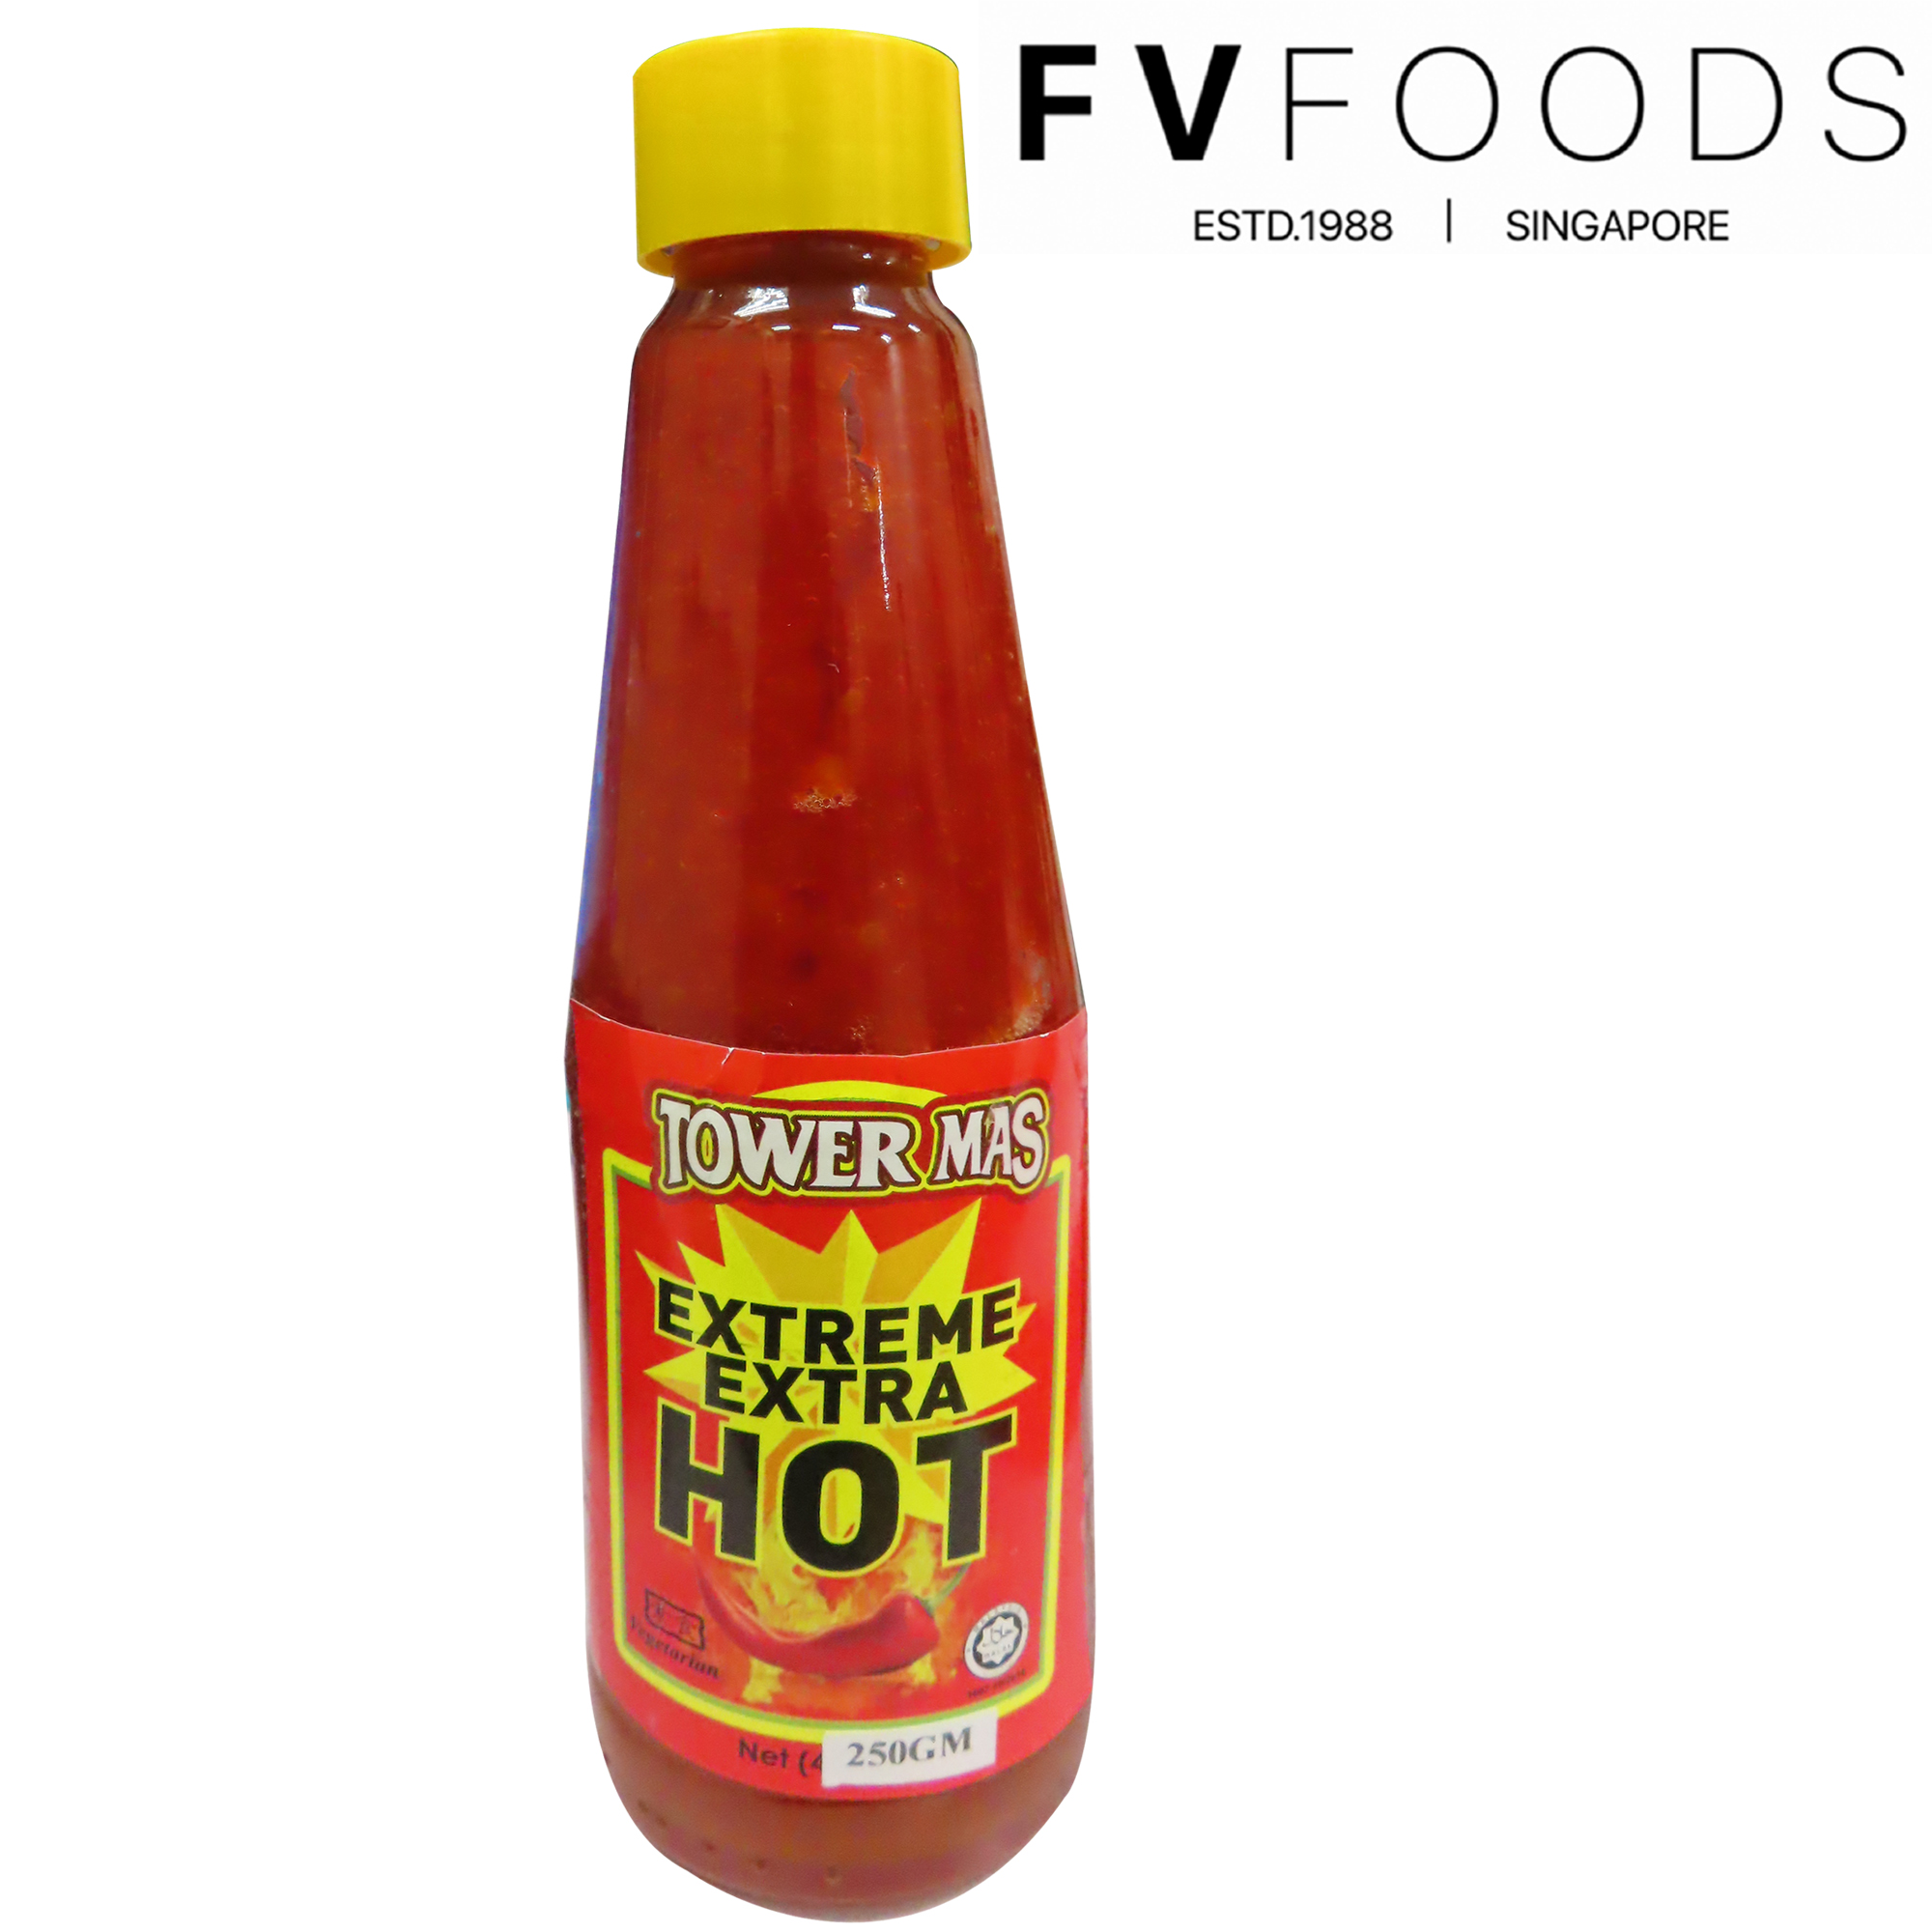 Image Tower Mas Extreme Extra Hot Chili 金塔 - 特辣辣椒 250grams